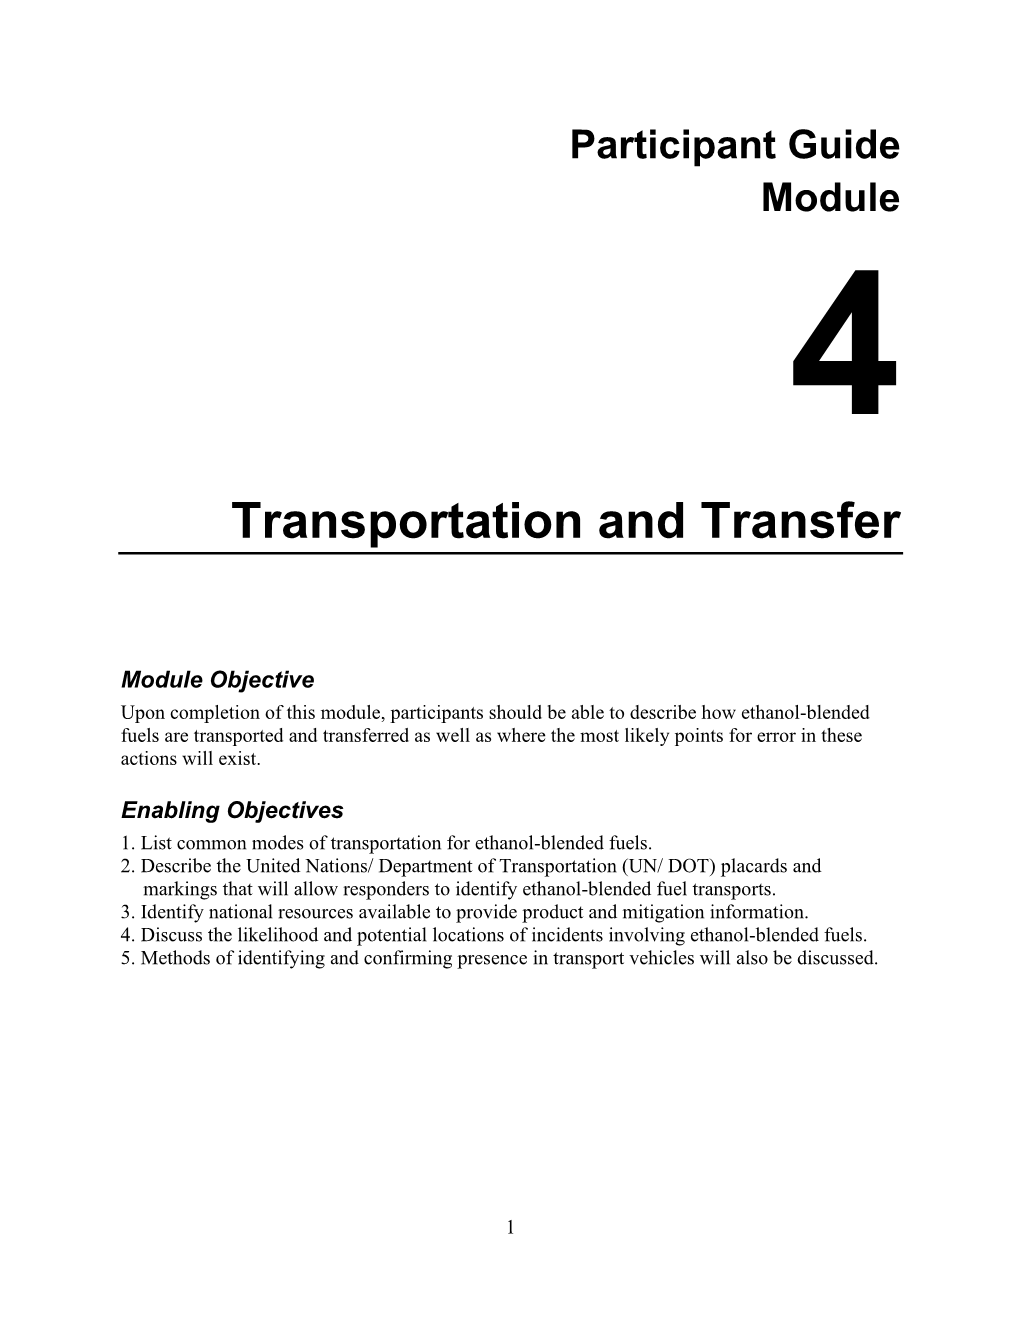 Transportation and Transfer Participant Guide